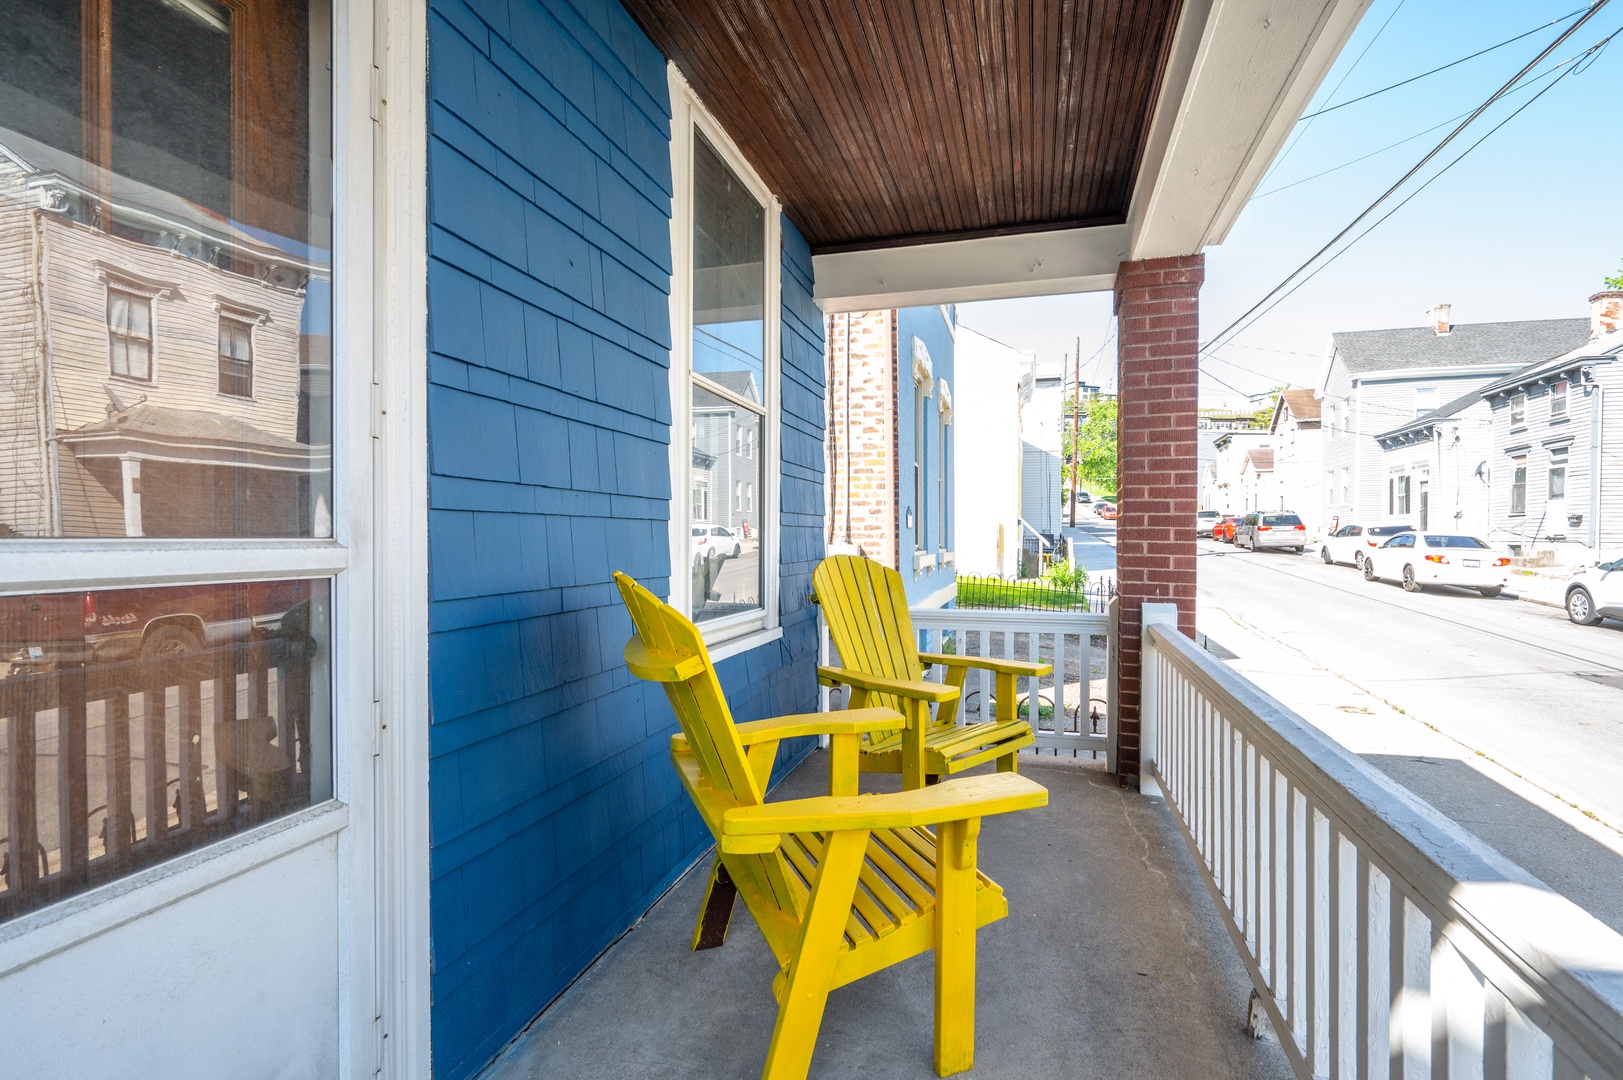 Outdoor seating in the front porch